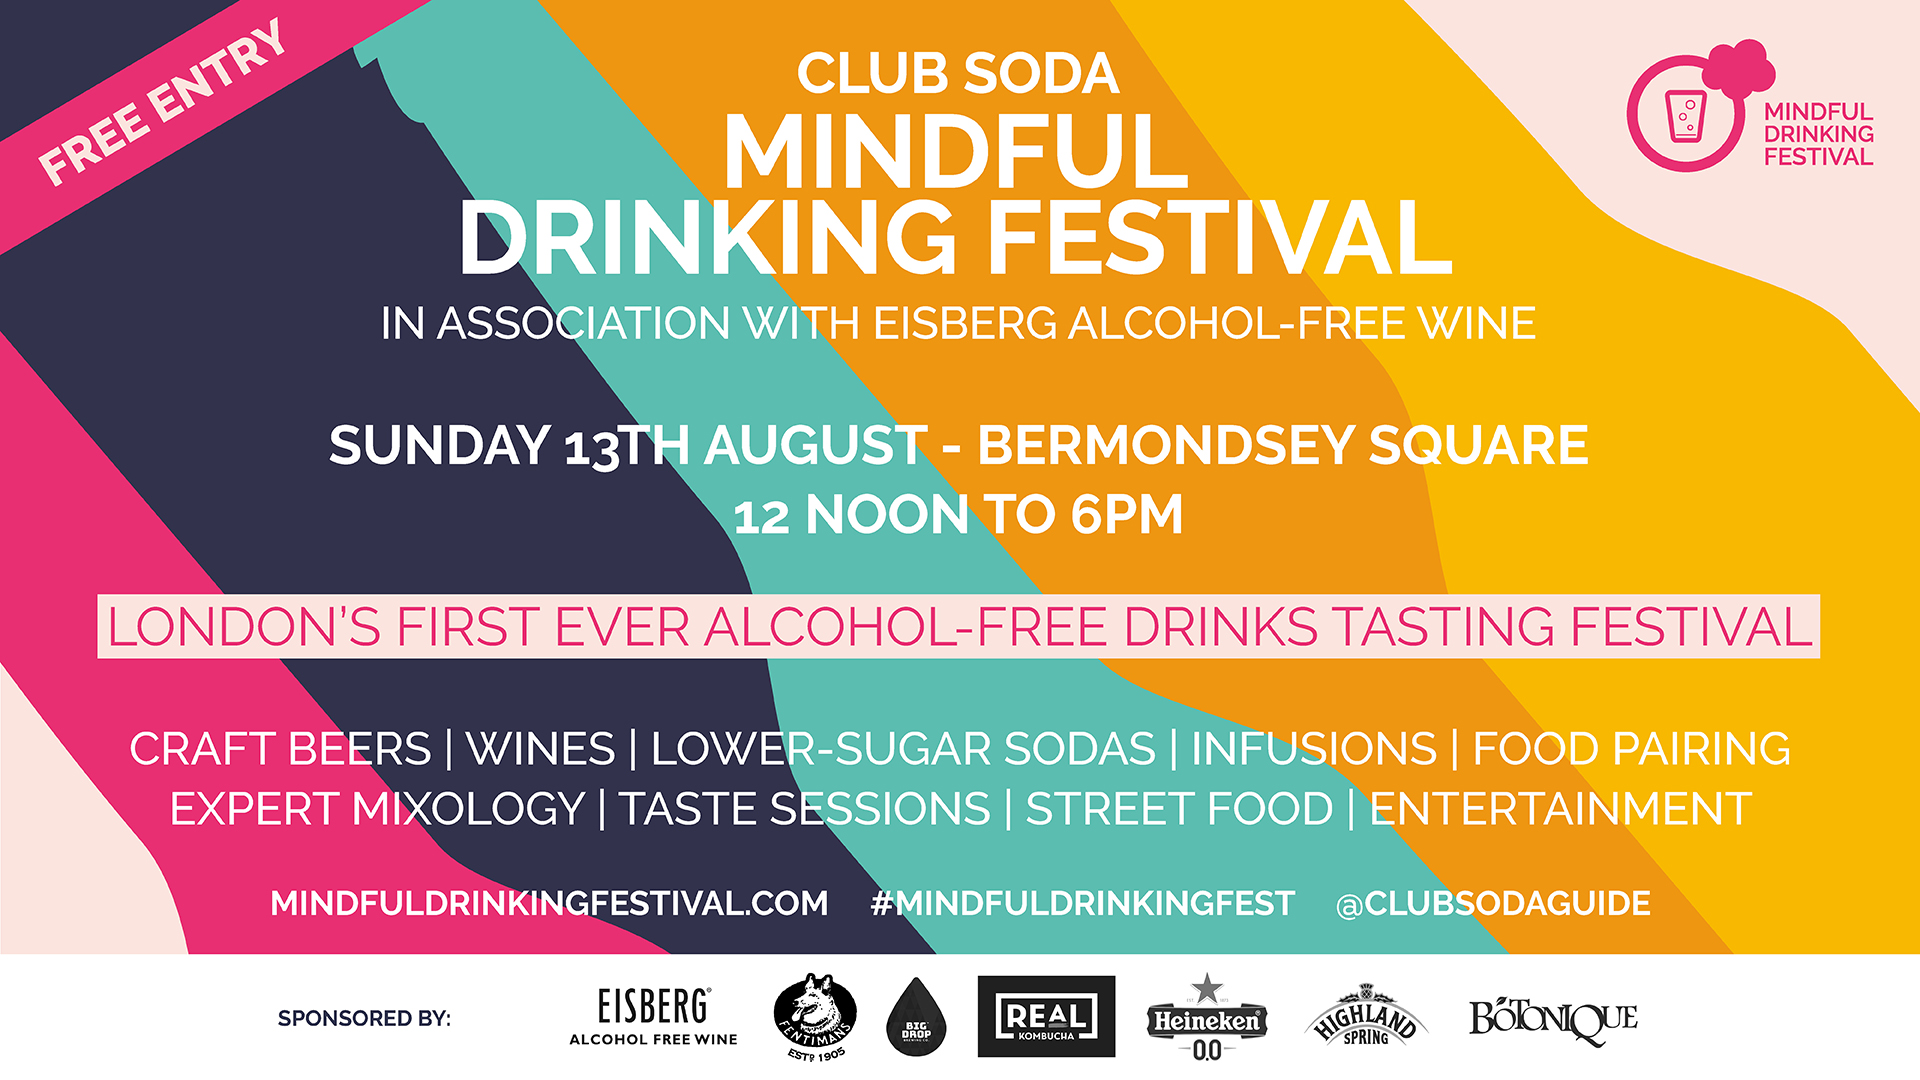 Mindful Drinking Festival Everything in Moderation. Except Flavour.